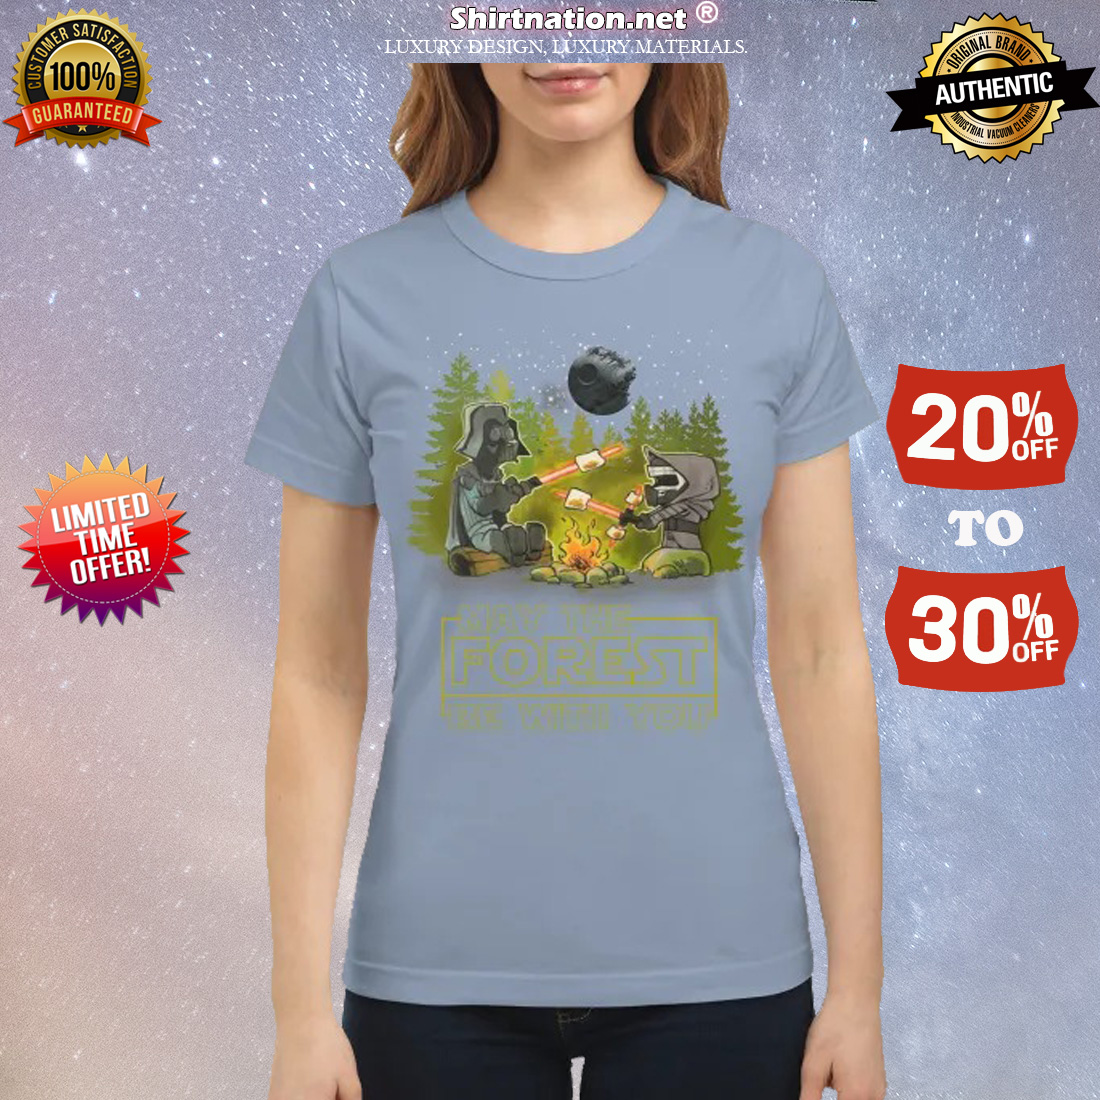 Camping may the forest be with you classic shirt